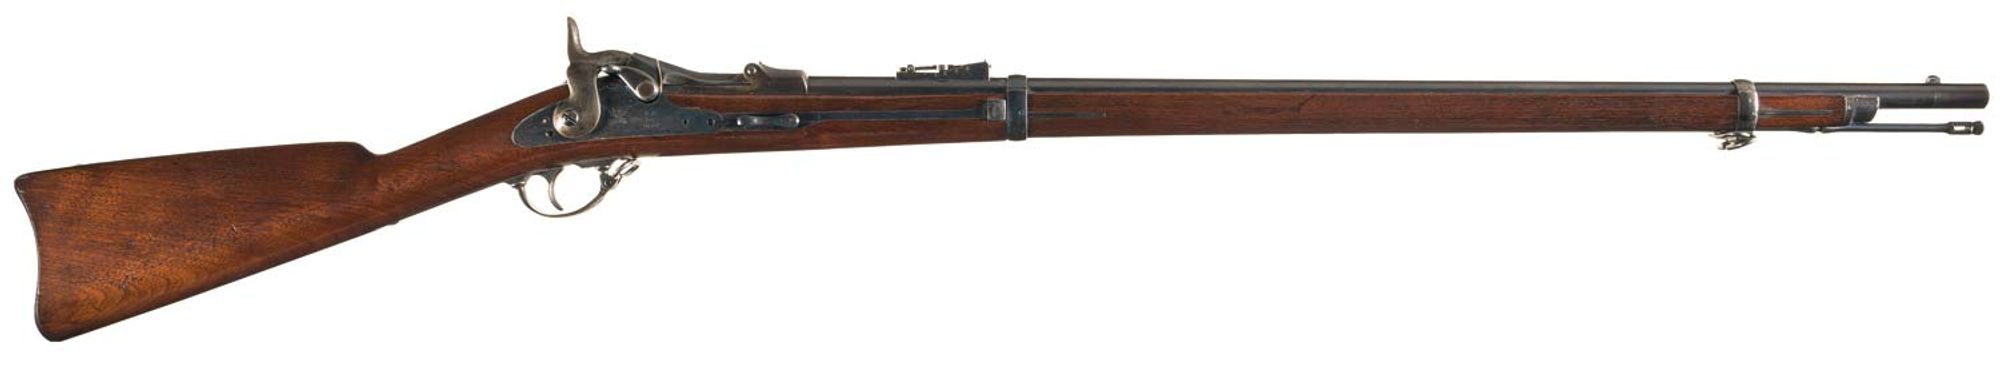 Lot 3507: Rare Early Springfield Armory Model 1873 Trapdoor Rifle with Rare Metcalfe Device